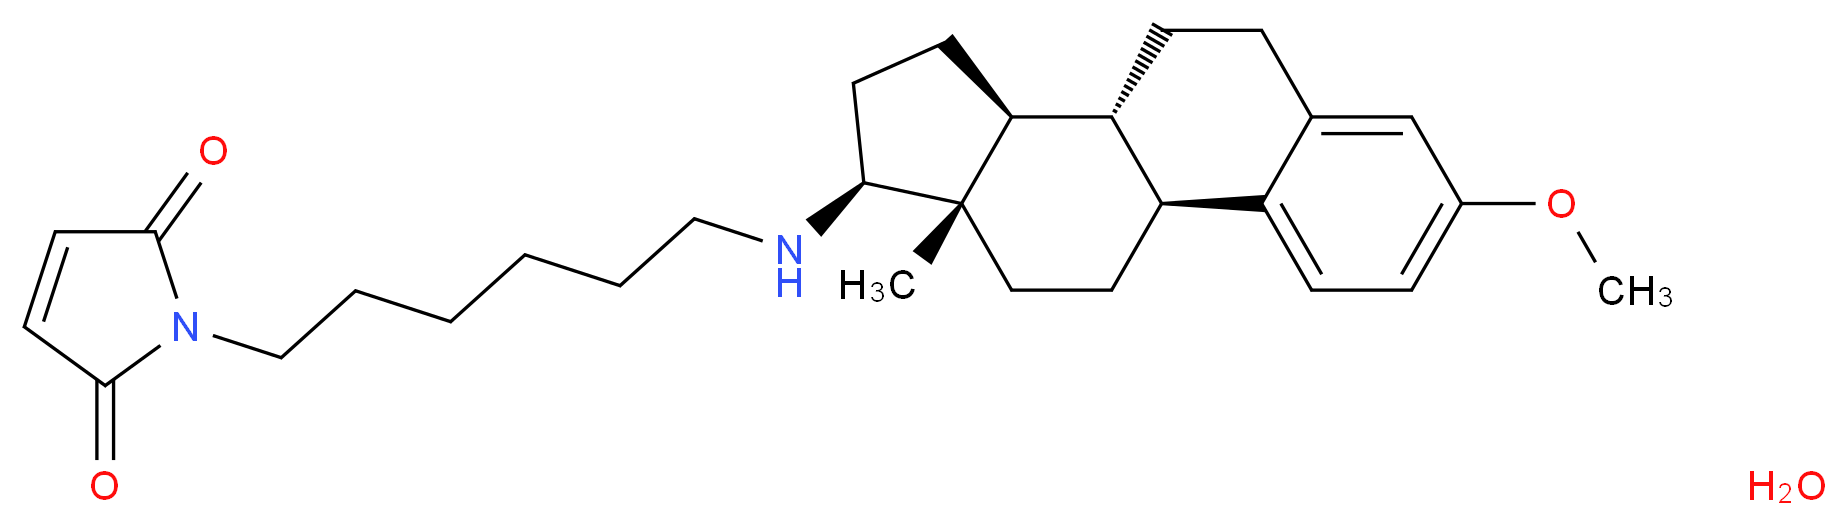 112648-68-7(anhydrous) molecular structure